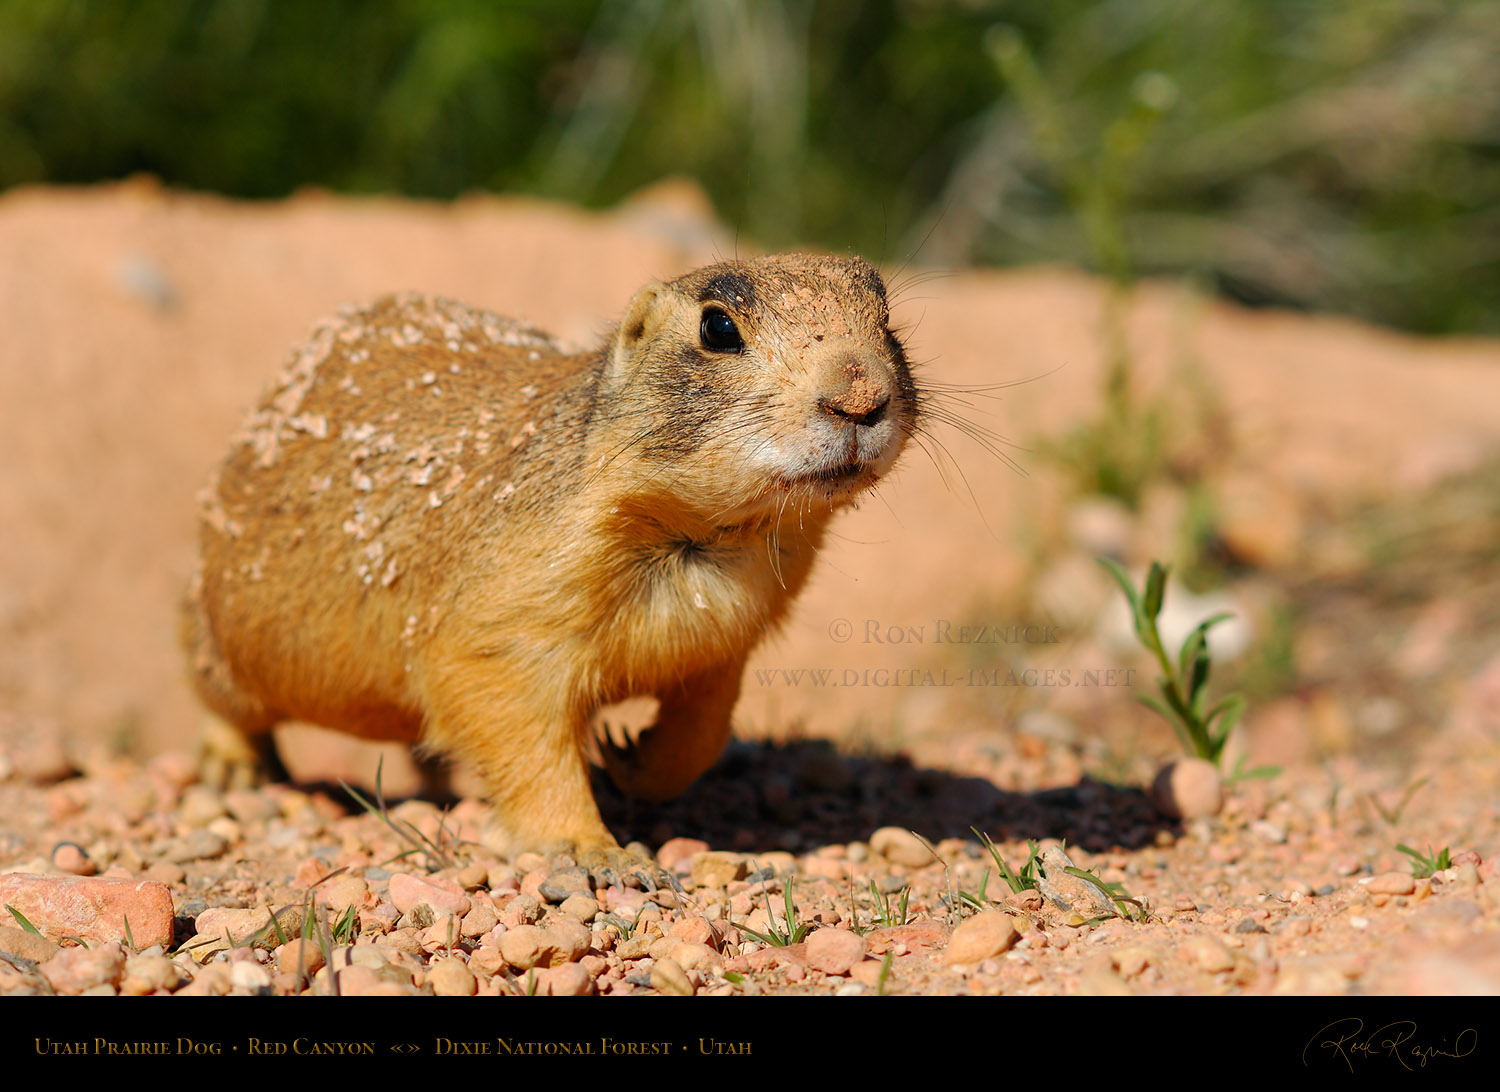 UTAH PRAIRIE DOG | Female with young based on her naked 